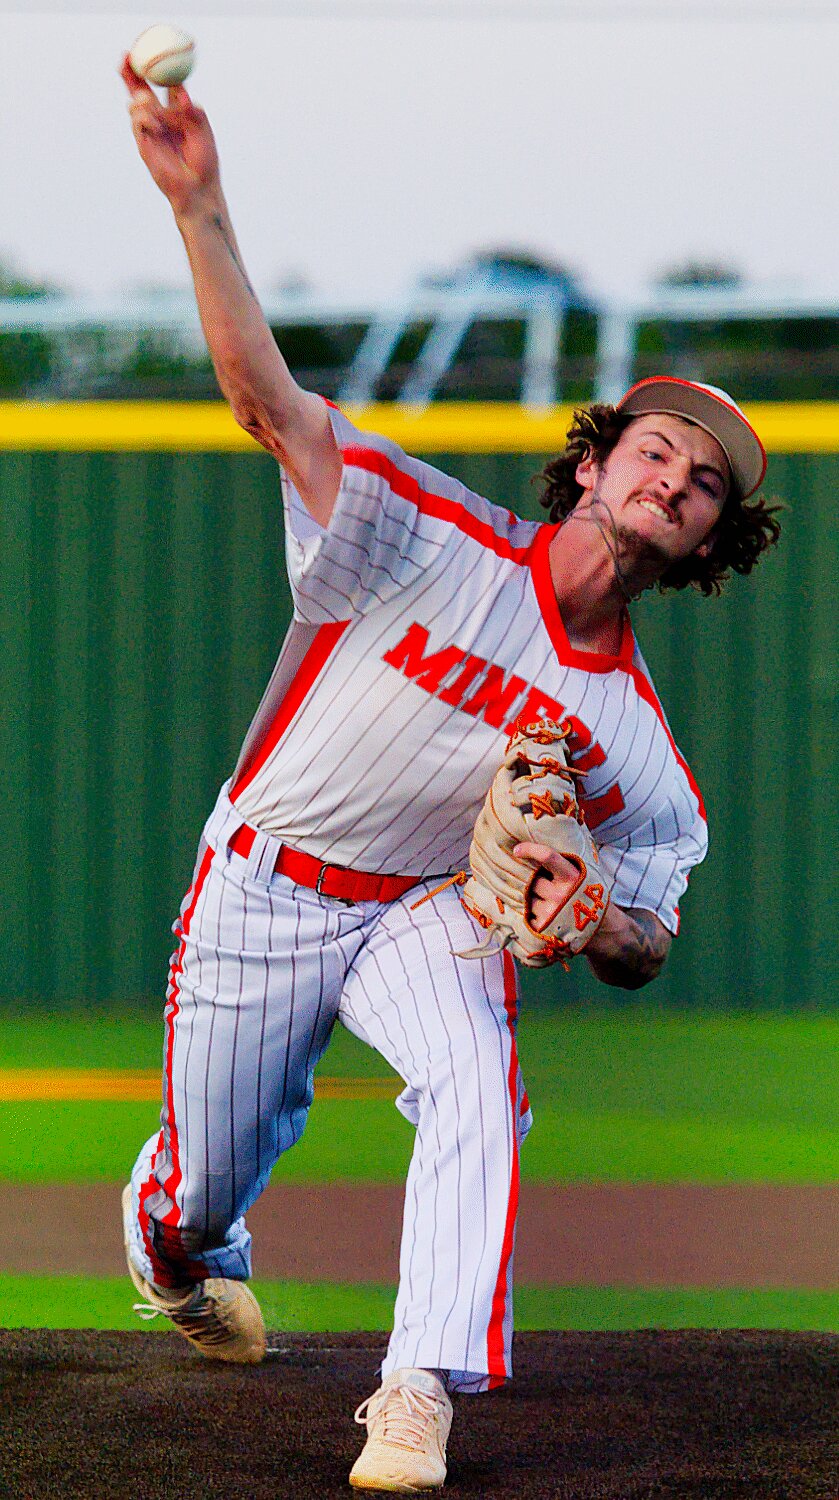 Mineola pitcher Kaden Bell delivers one of his 88 pitches in his 7-inning shutout performance. [more photos]